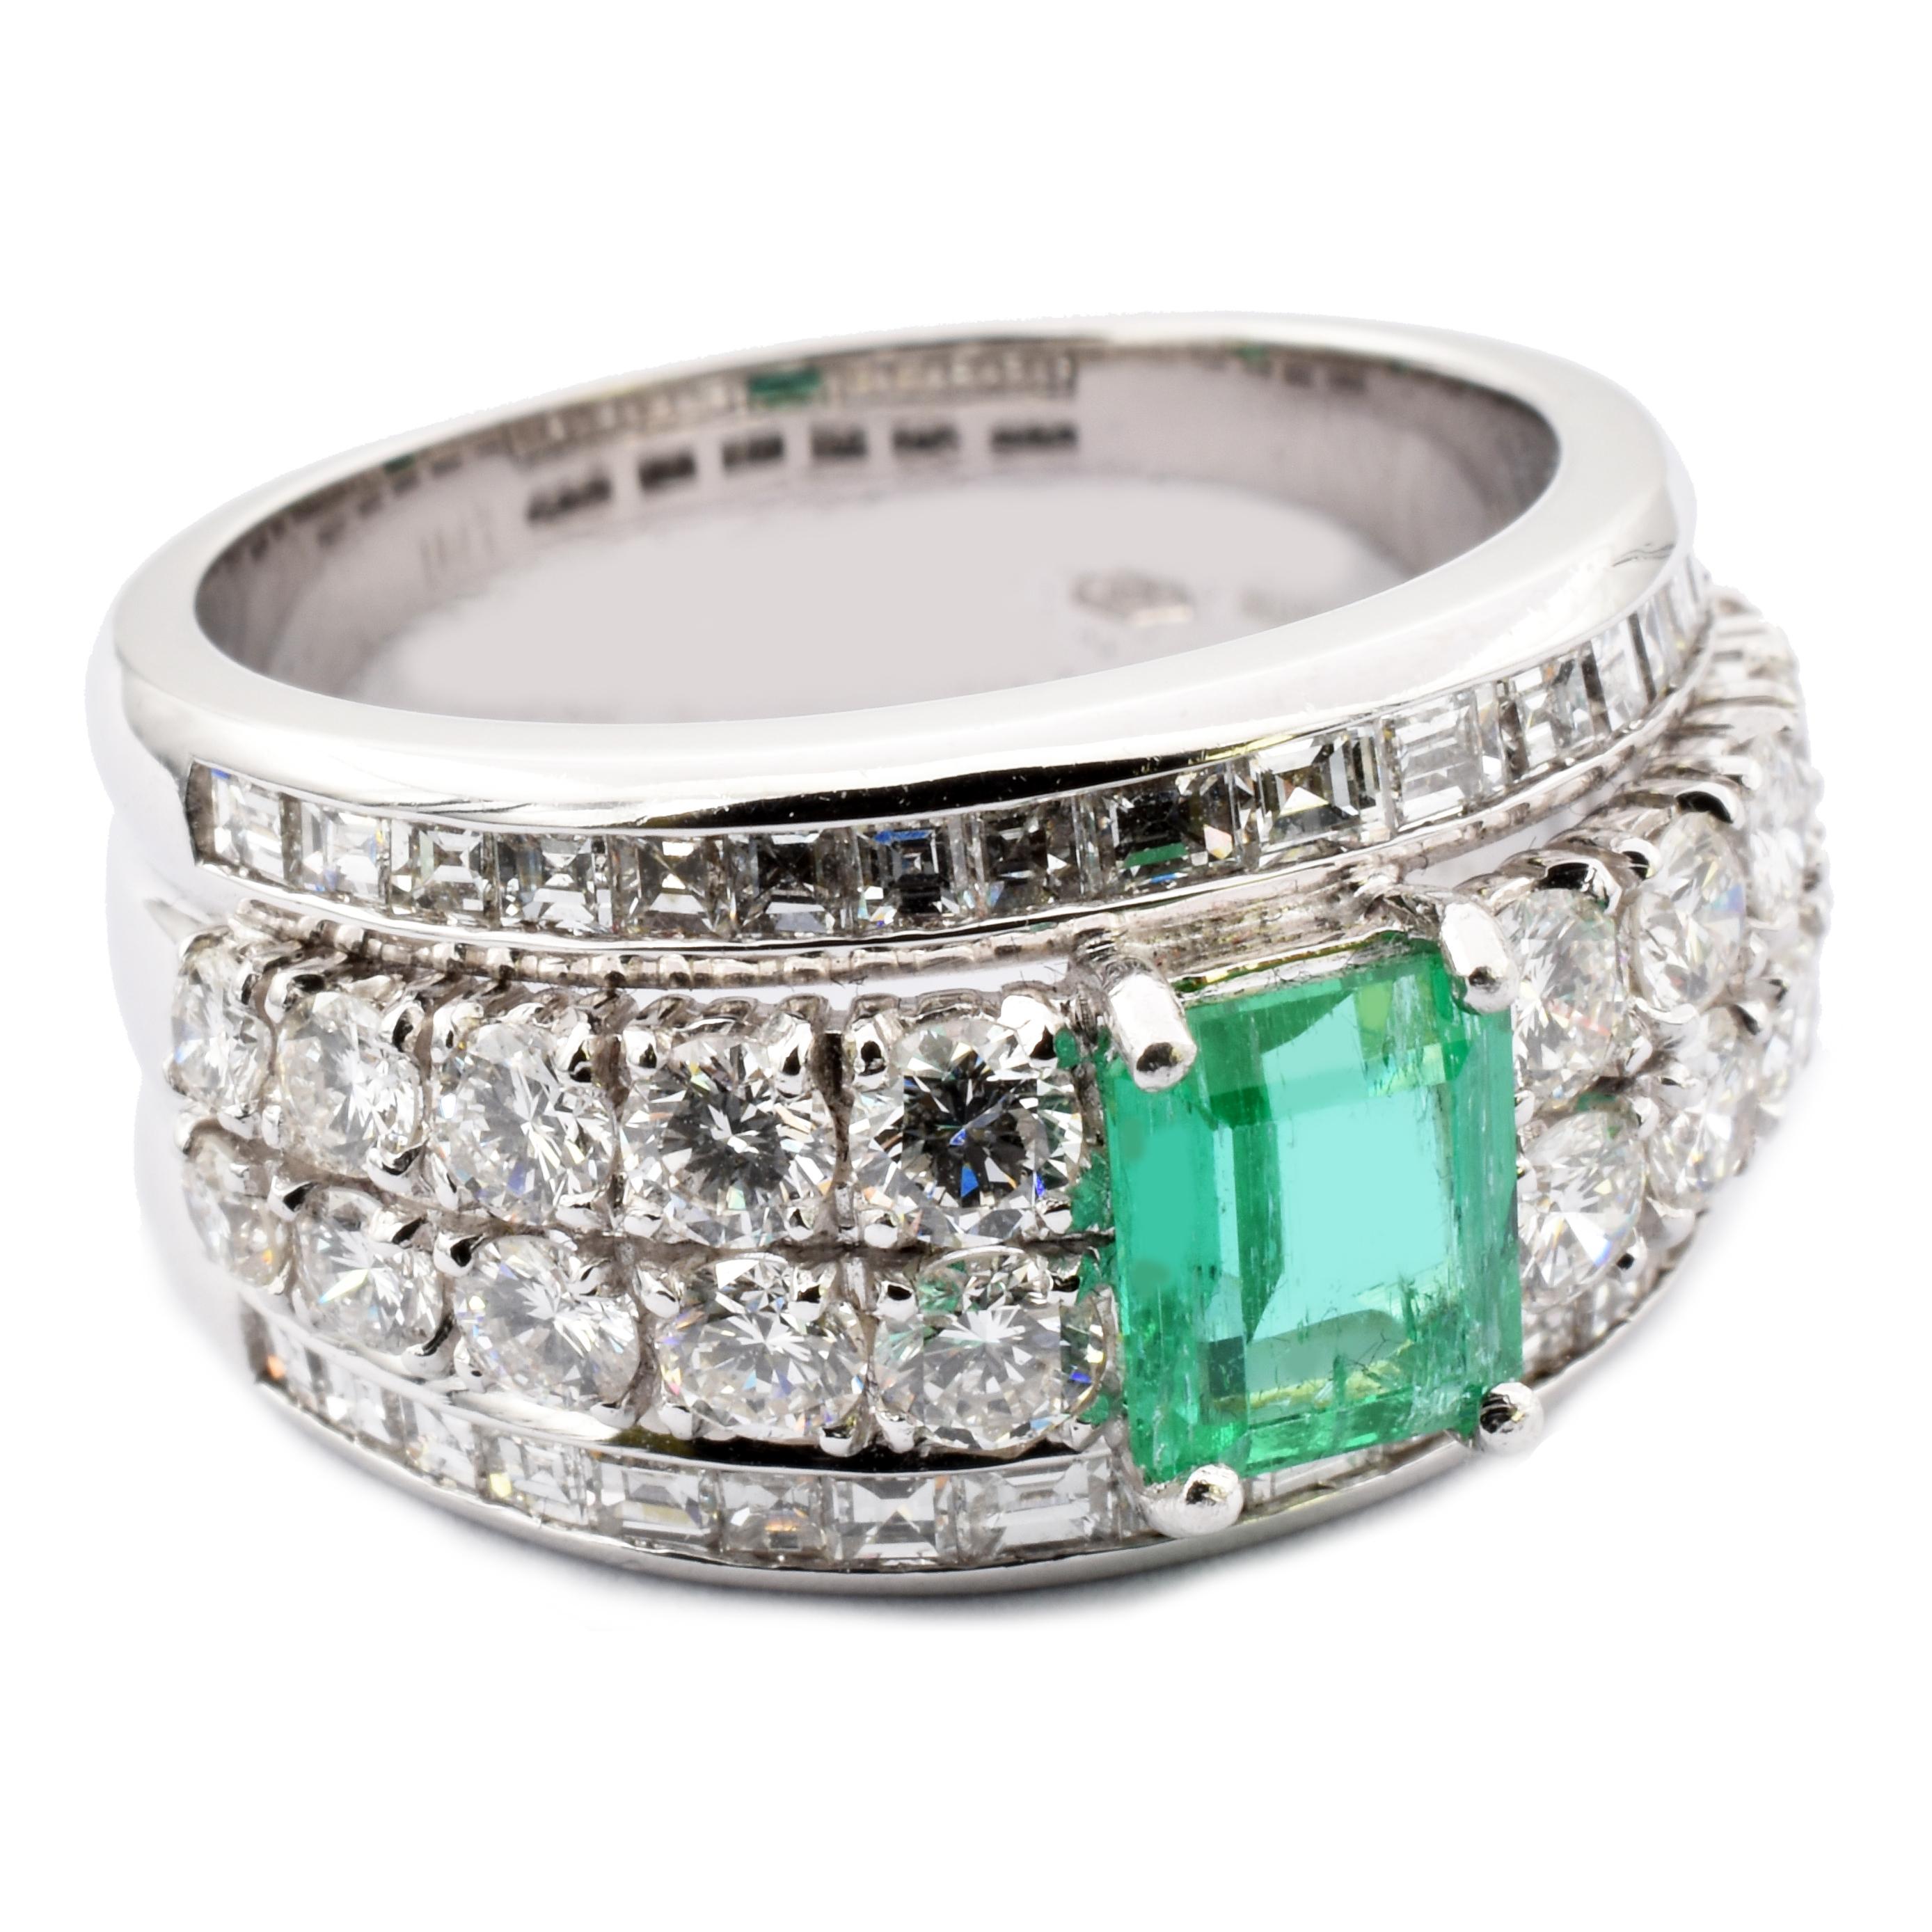 Gilberto Cassola 18Kt White Gold Ring with an Octagonal Cut Bright Green Natural Colombia Emerald. 
This Ring has 10 Brillant Cut Round Diamonds on each side of the Emerald and 2 rows of Baguette Cut Diamonds.
Natural Colombia Emerald ct 0.79 mm